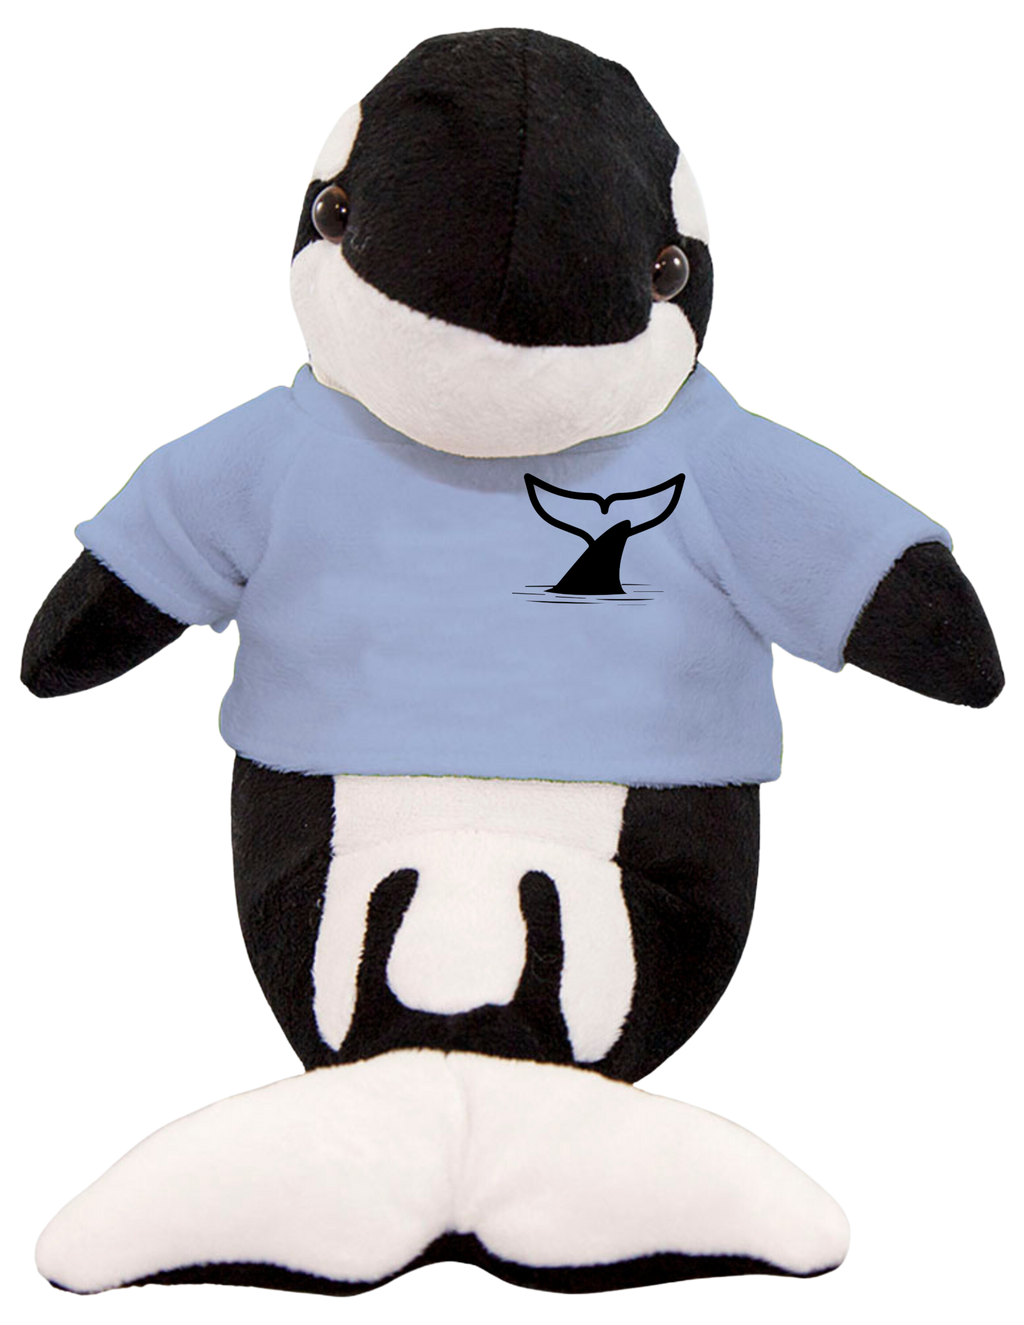 Children's Gift - Whale with blue shirt